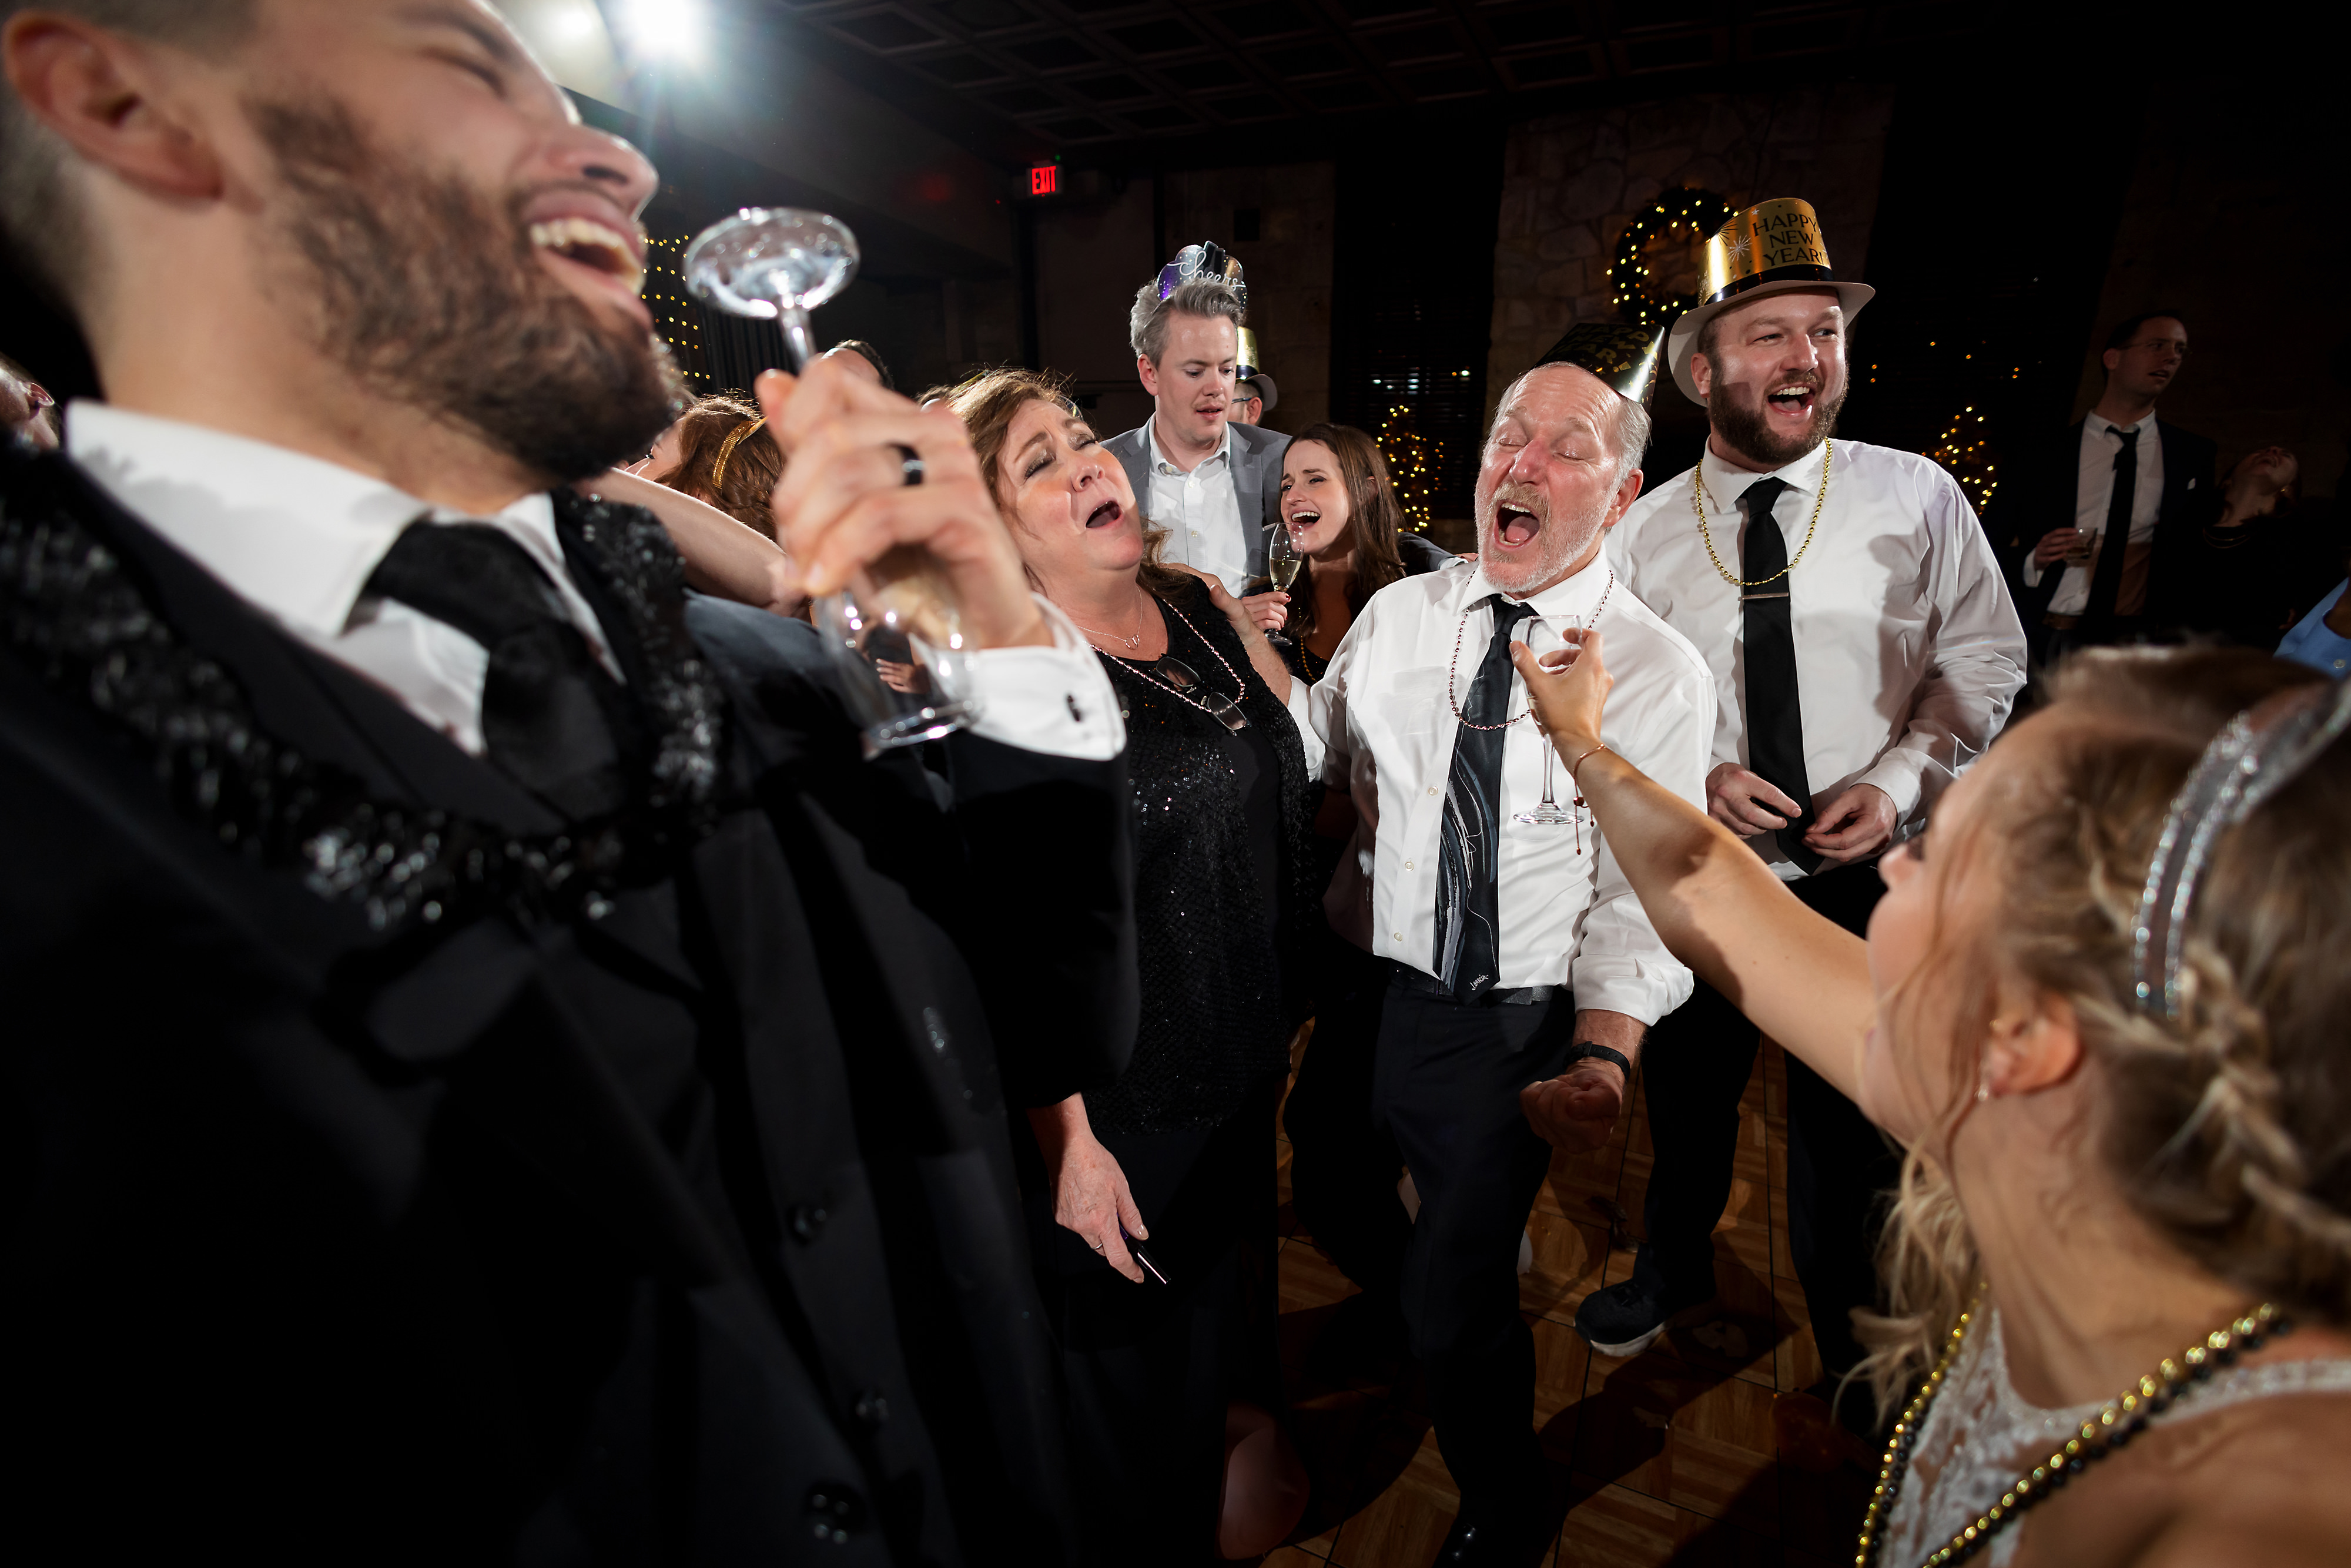 Wedding guests dance during winter wedding at Two Brothers Roundhouse Brewery in Aurora, Illinois